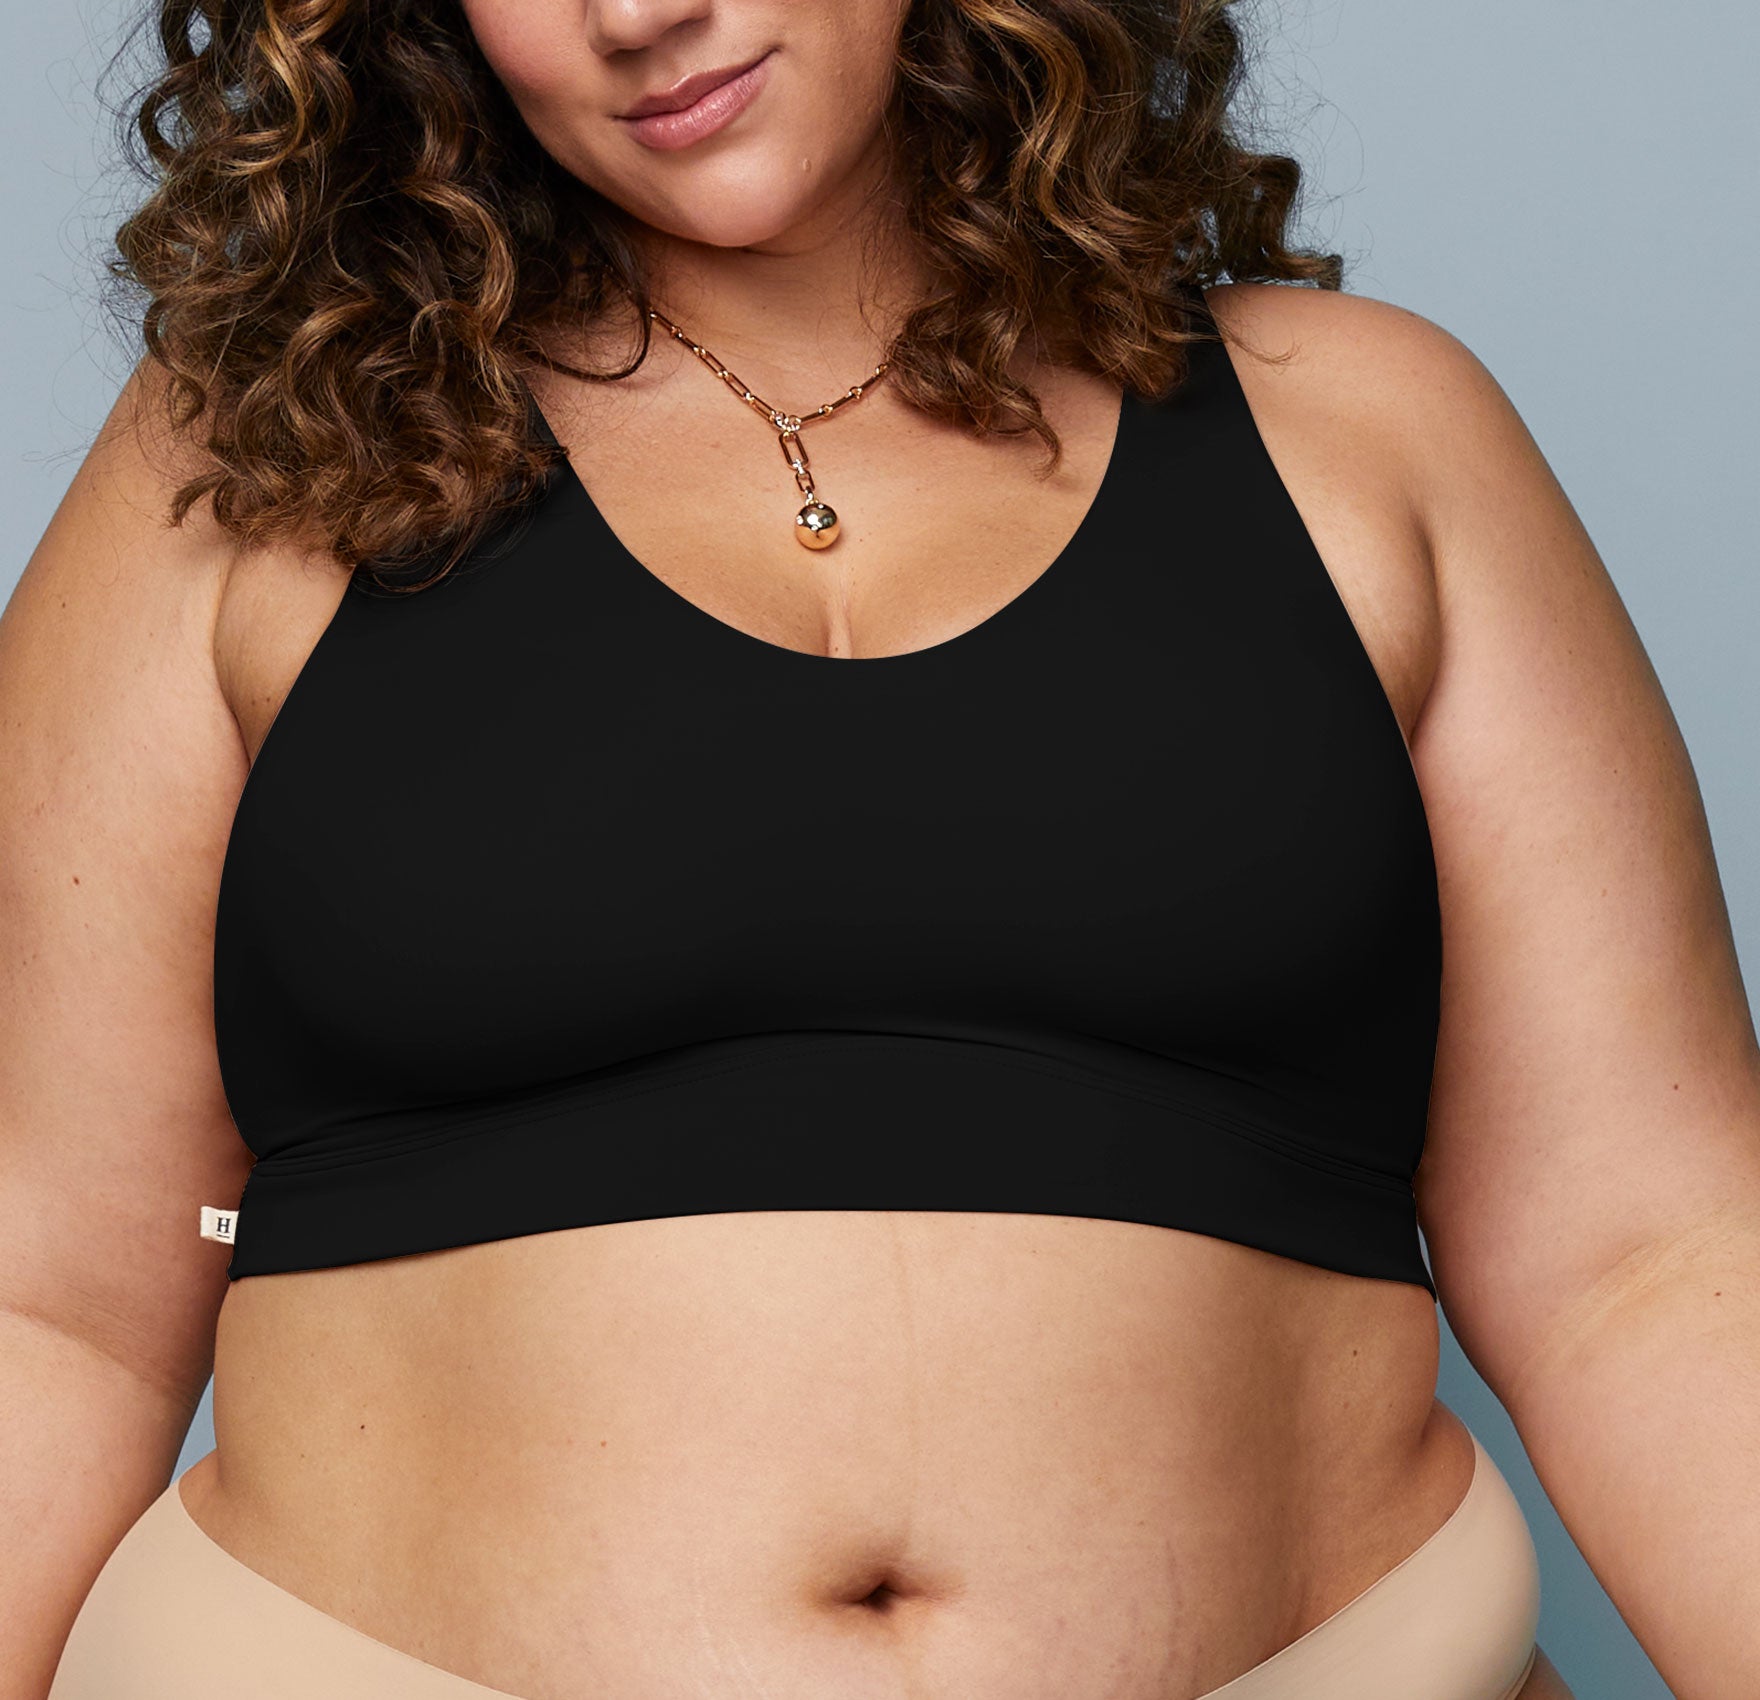 Caring for Your Harper Wilde Bras